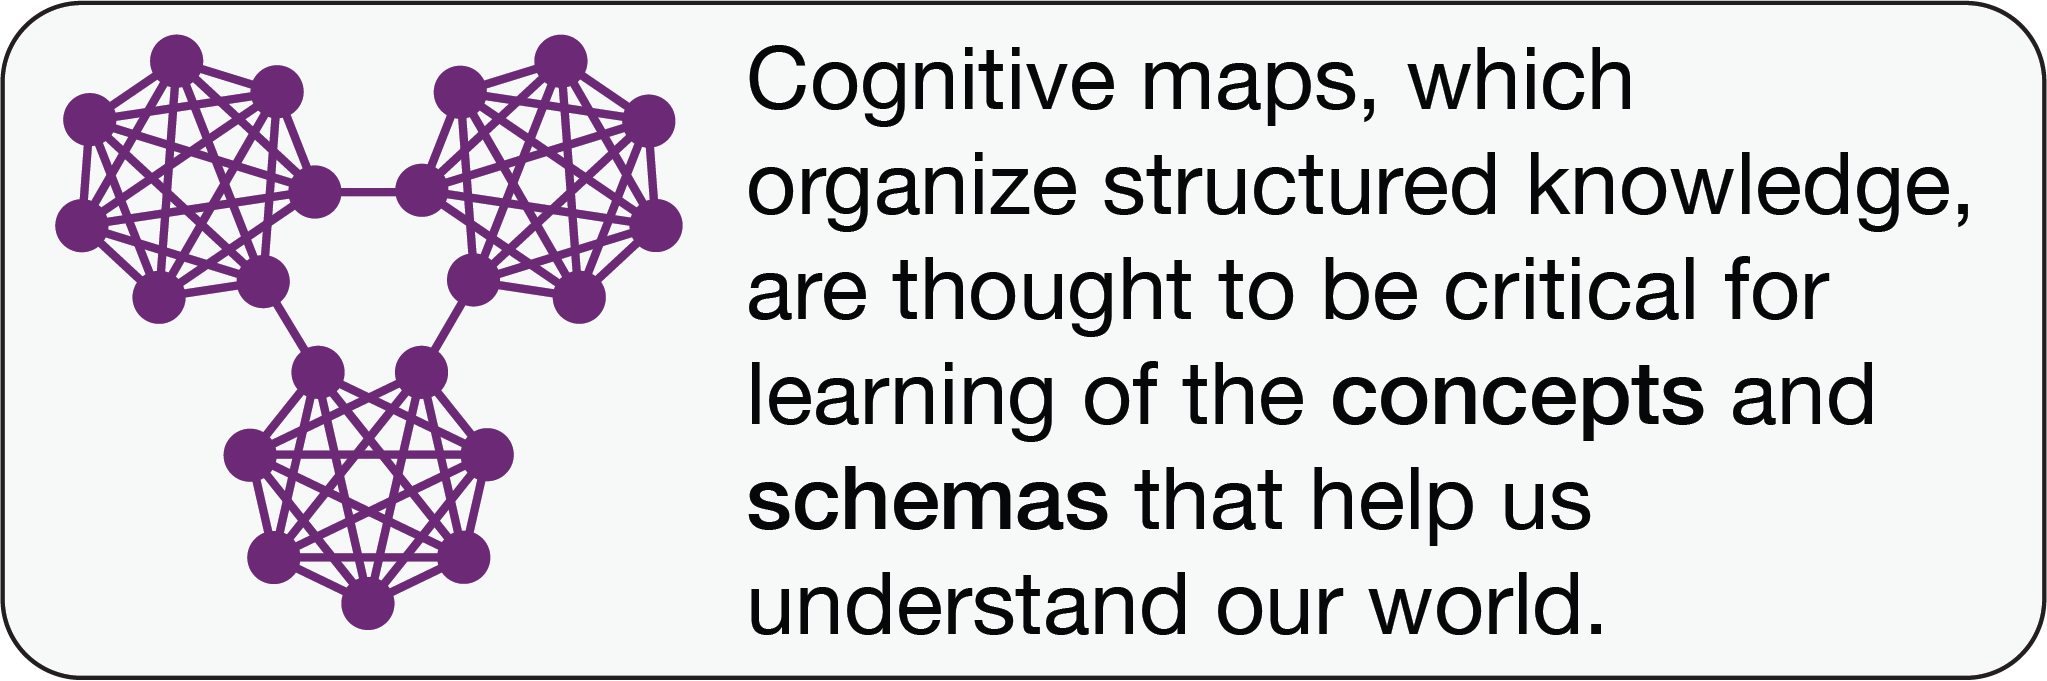 Cognitive maps, which organize structured knowledge, are thought to be critical for learning of the concepts and schemas that help us understand our world.